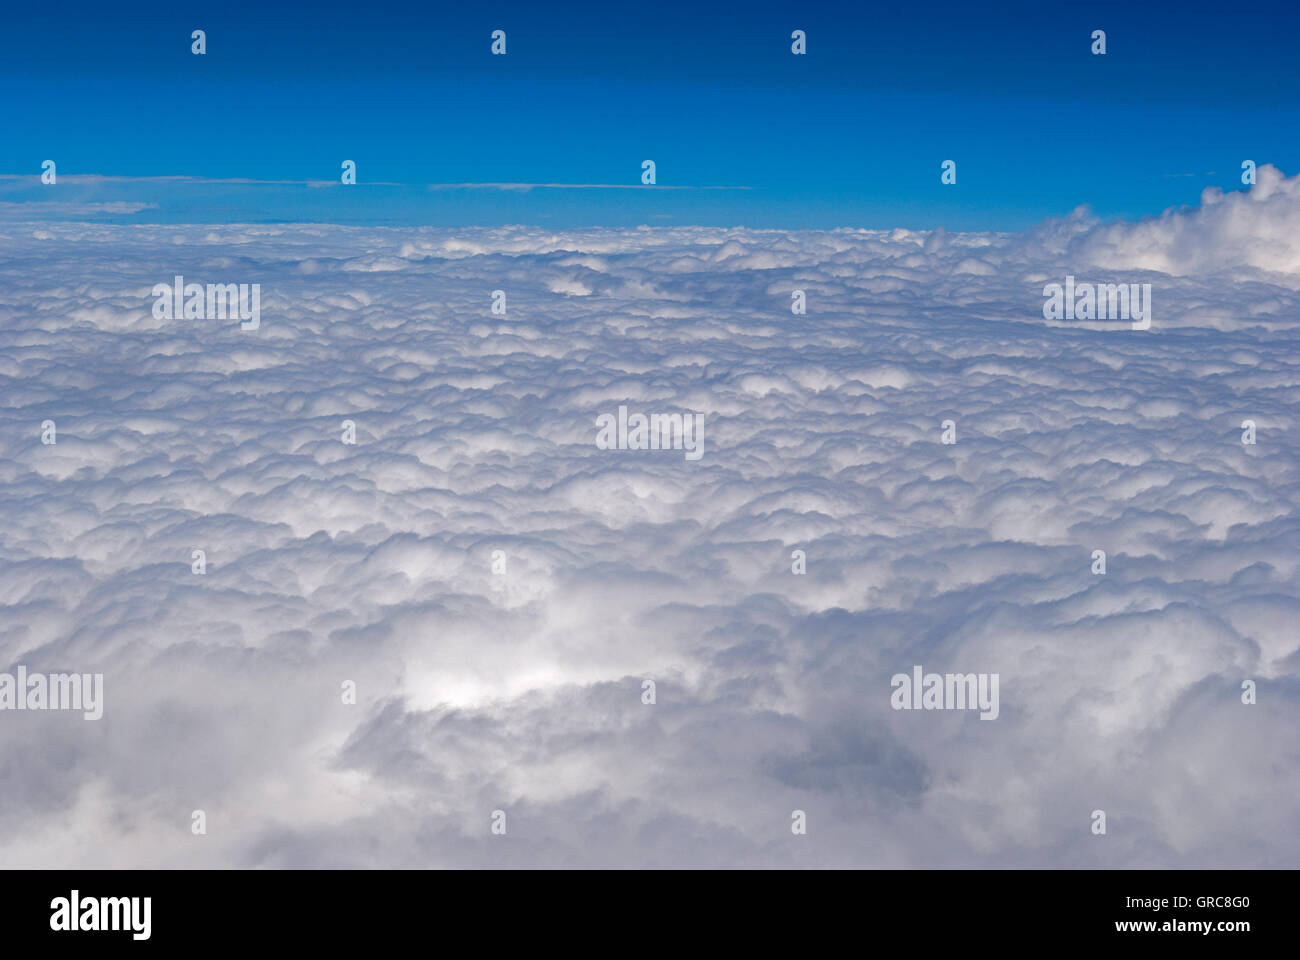 Full cloud cover taken from airplane window Stock Photo